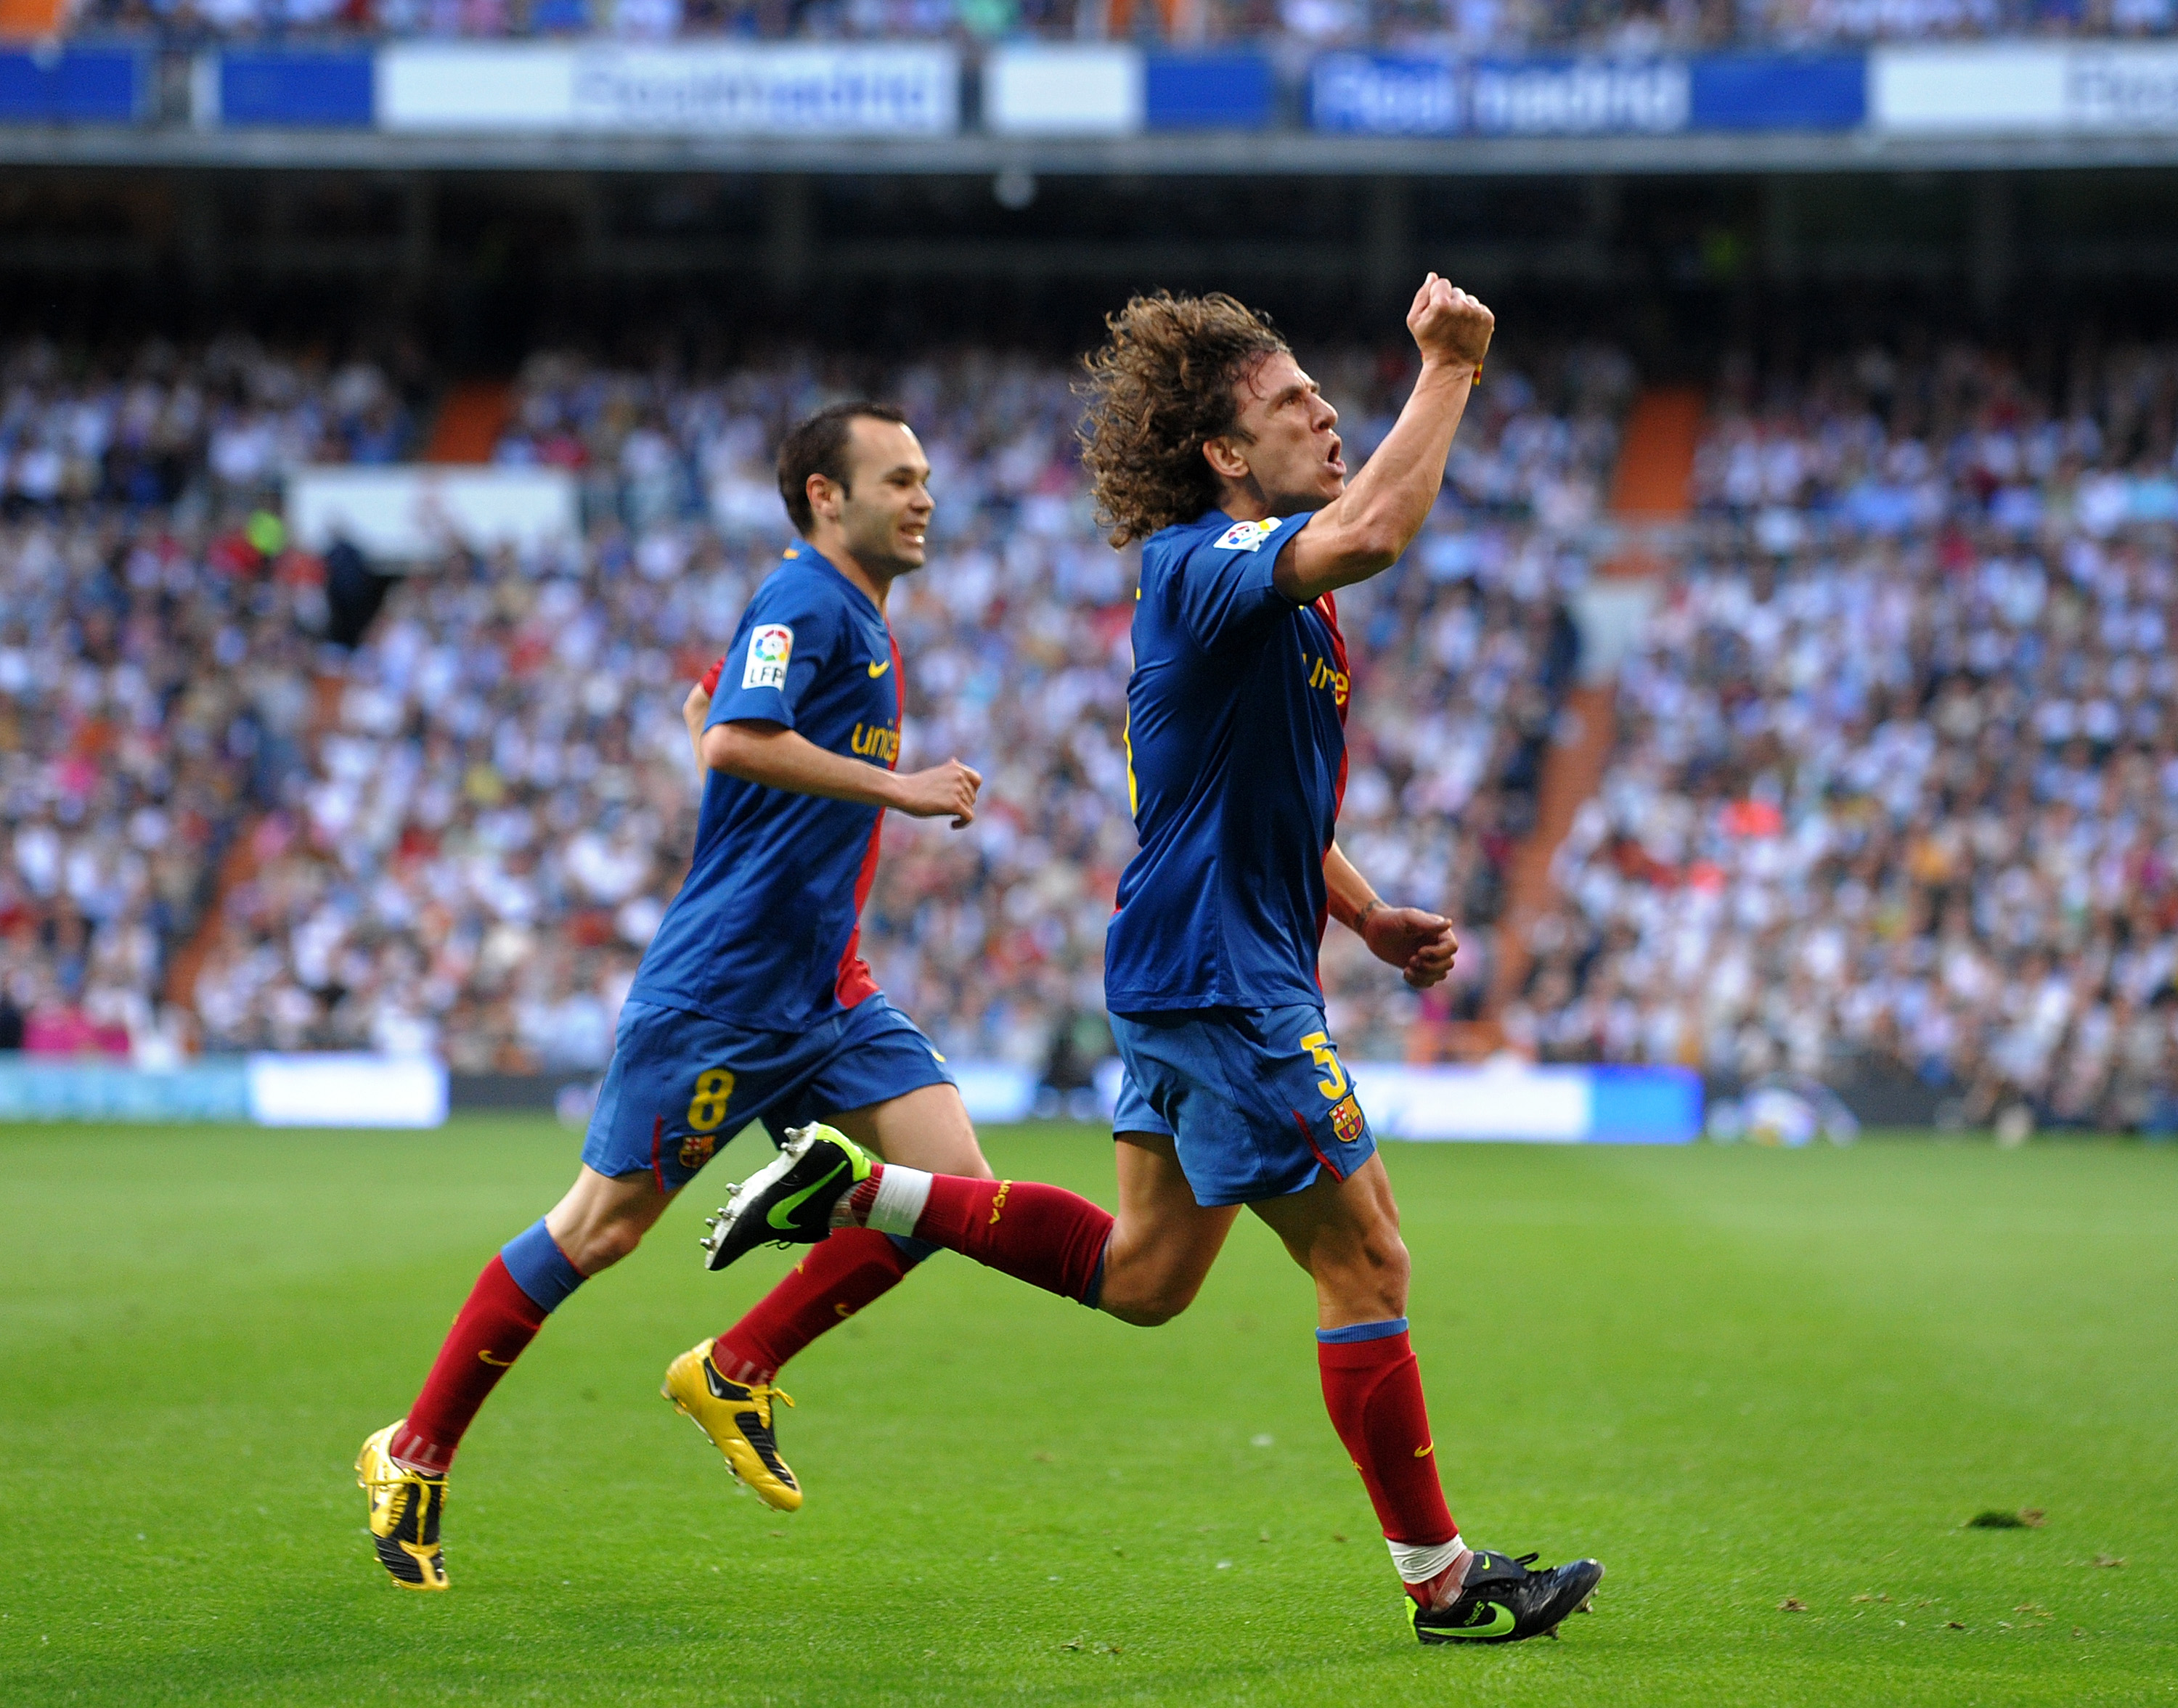 MADRID, SPAIN - MAY 02:  Carles Puyol (R) of Barcelona celebrates scoring his sides second goal during the La Liga match between Real Madrid and Barcelona at the Santiago Bernabeu Stadium on May 2, 2009 in Madrid, Spain. Barcelona won the match 6-2.  (Pho